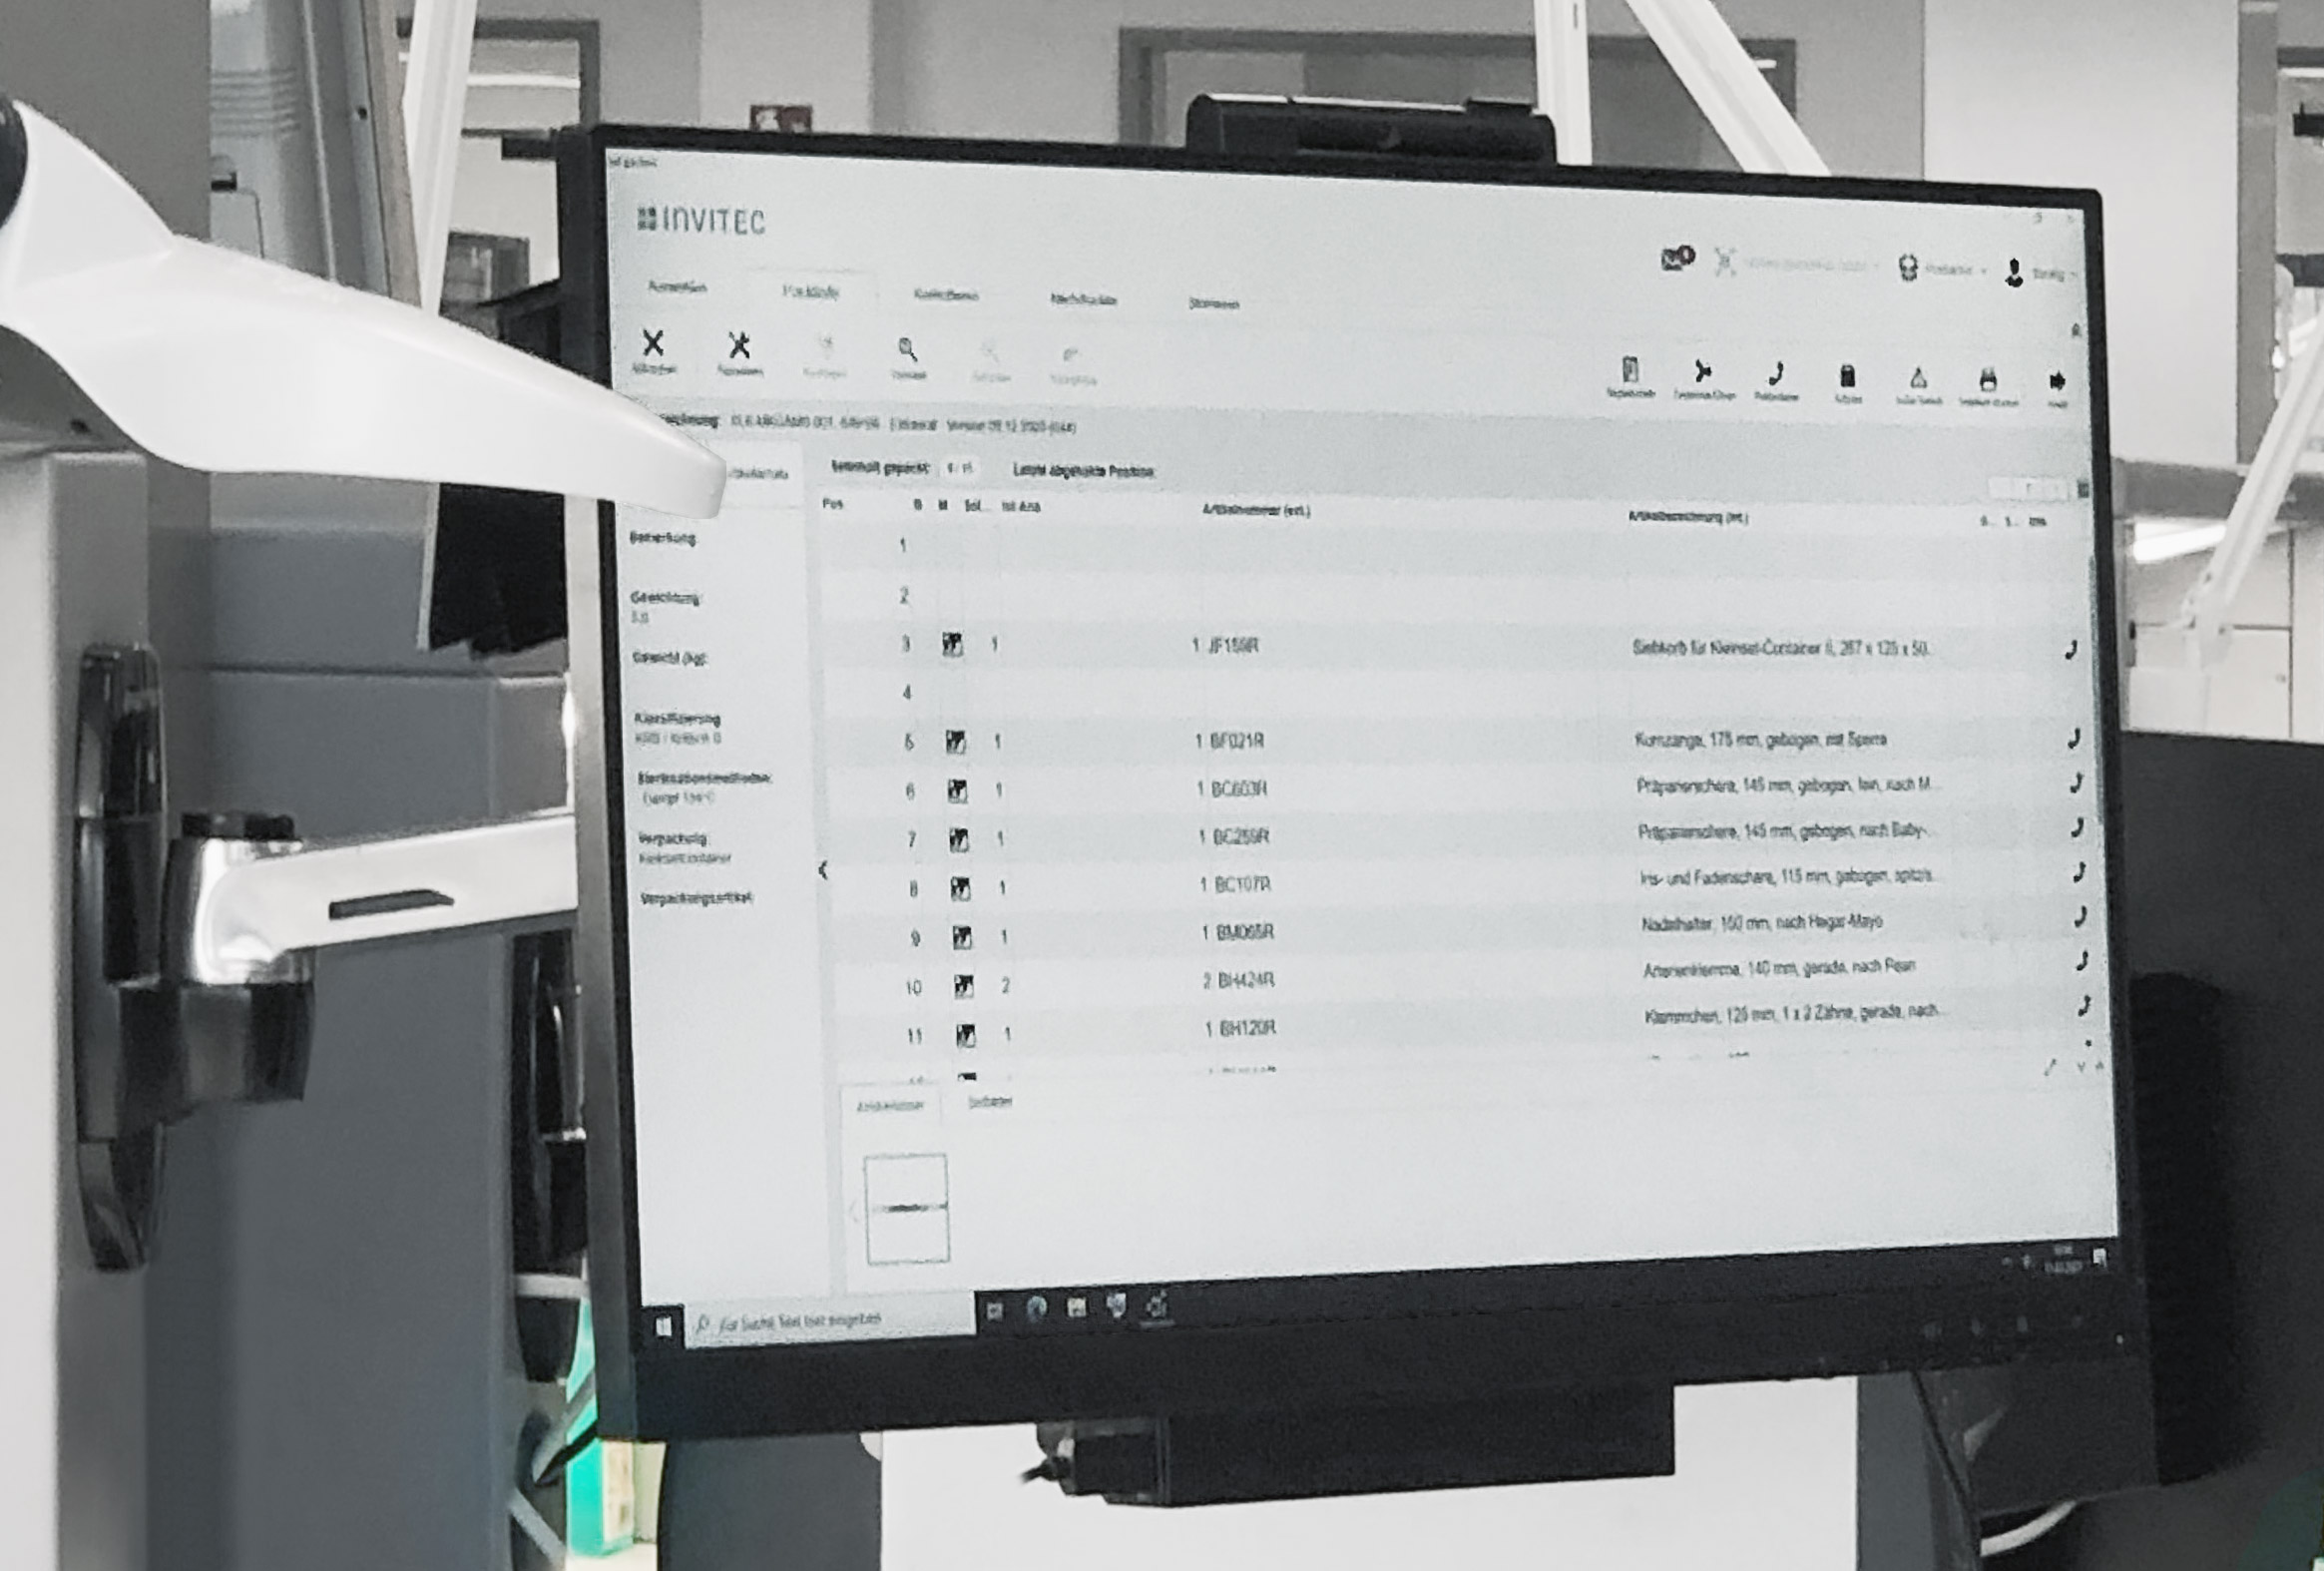 The Hänel Rotomat® is operated through the instacount®PLUS sterile goods management software